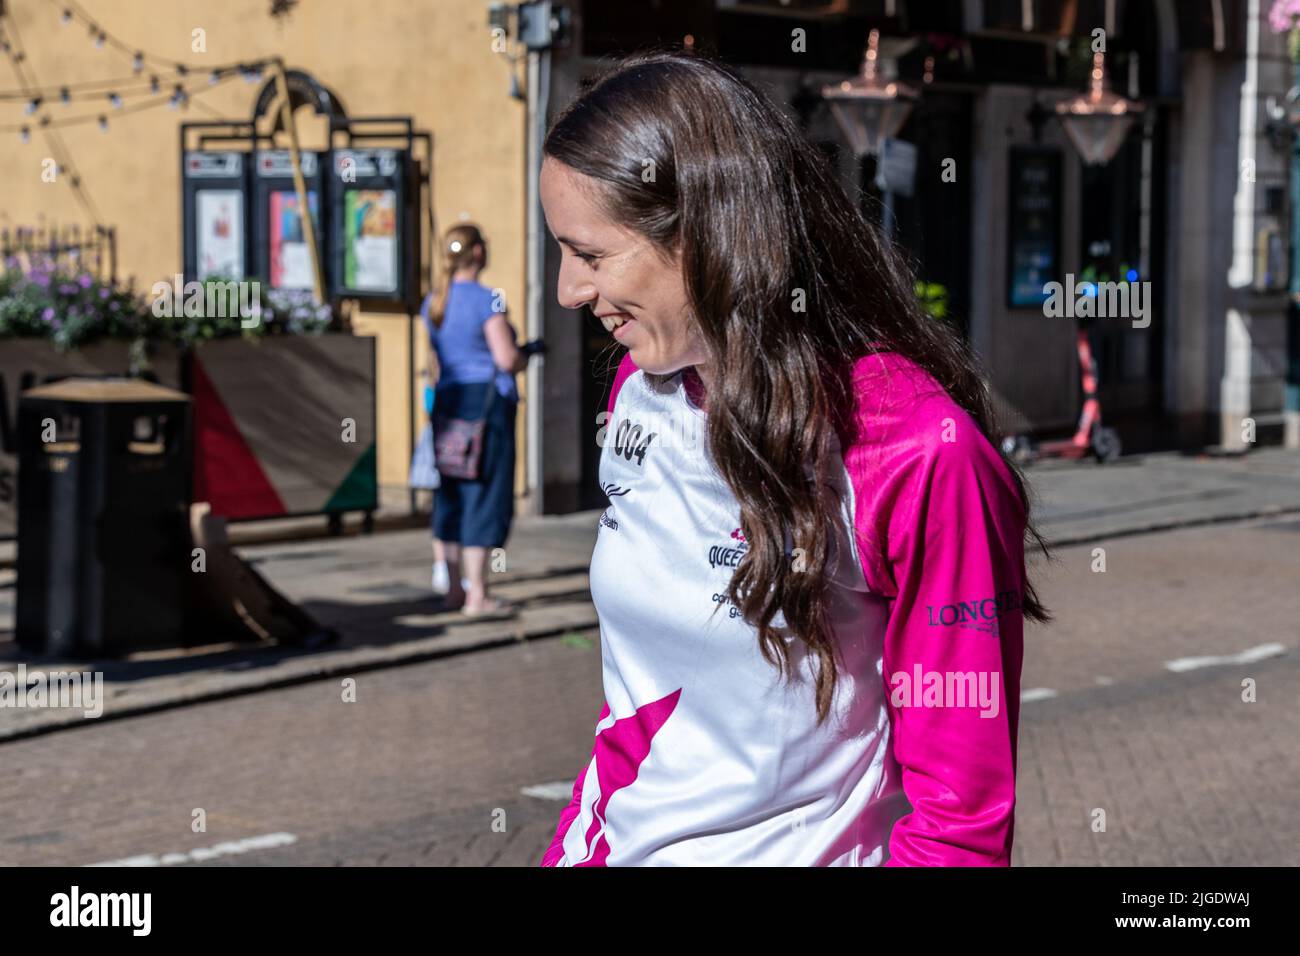 Northampton 10th July 2022. Commonwealth Games Queen’s Baton Relay going through the town centre with Olympic badminton player Chloe Birch waiting to  receive the baton while on it’s way to the The Birmingham 2022 Commonwealth Games.  Credit: Keith J Smith./Alamy Live News. Stock Photo